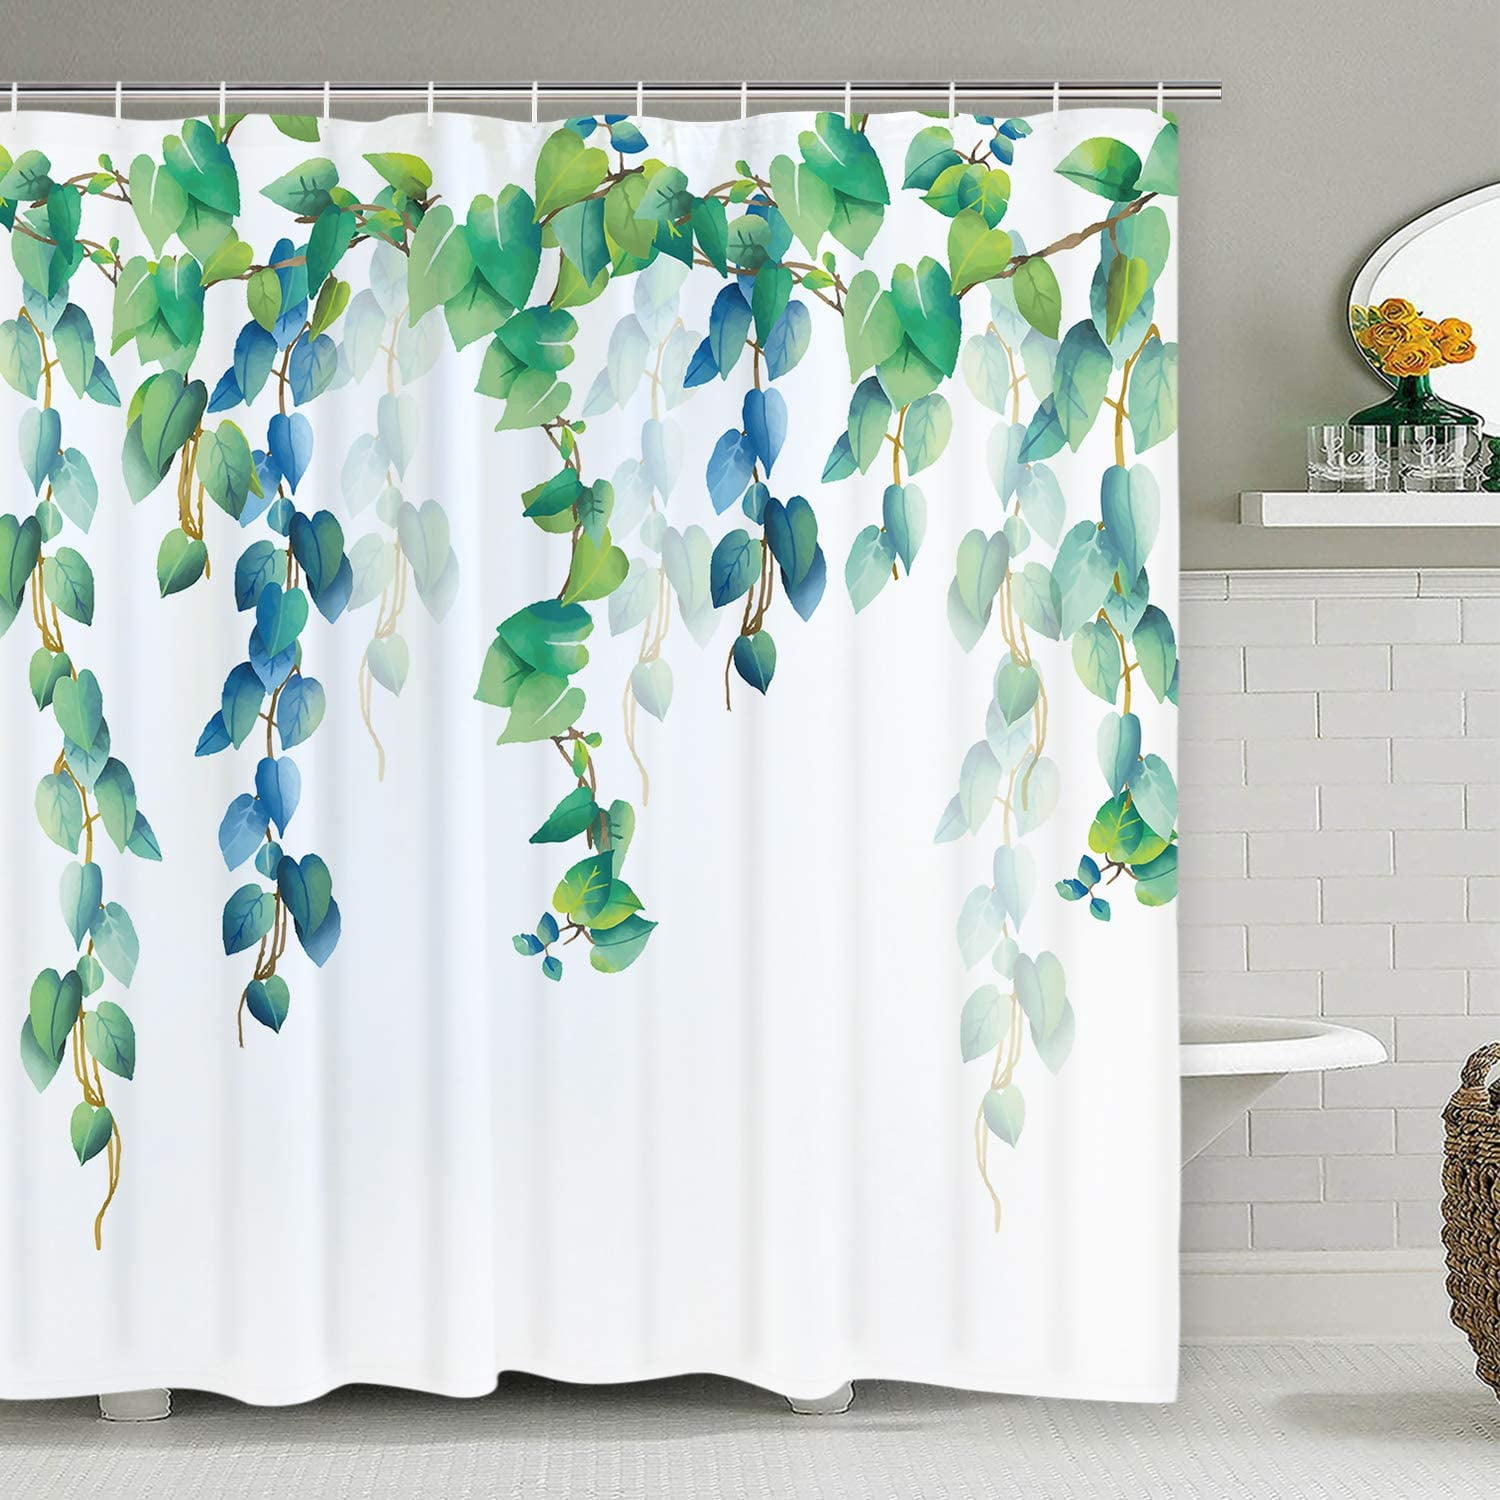 Details about   Leaf Shower Curtain Fabric Bathroom Decor Set with Hooks 4 Sizes 